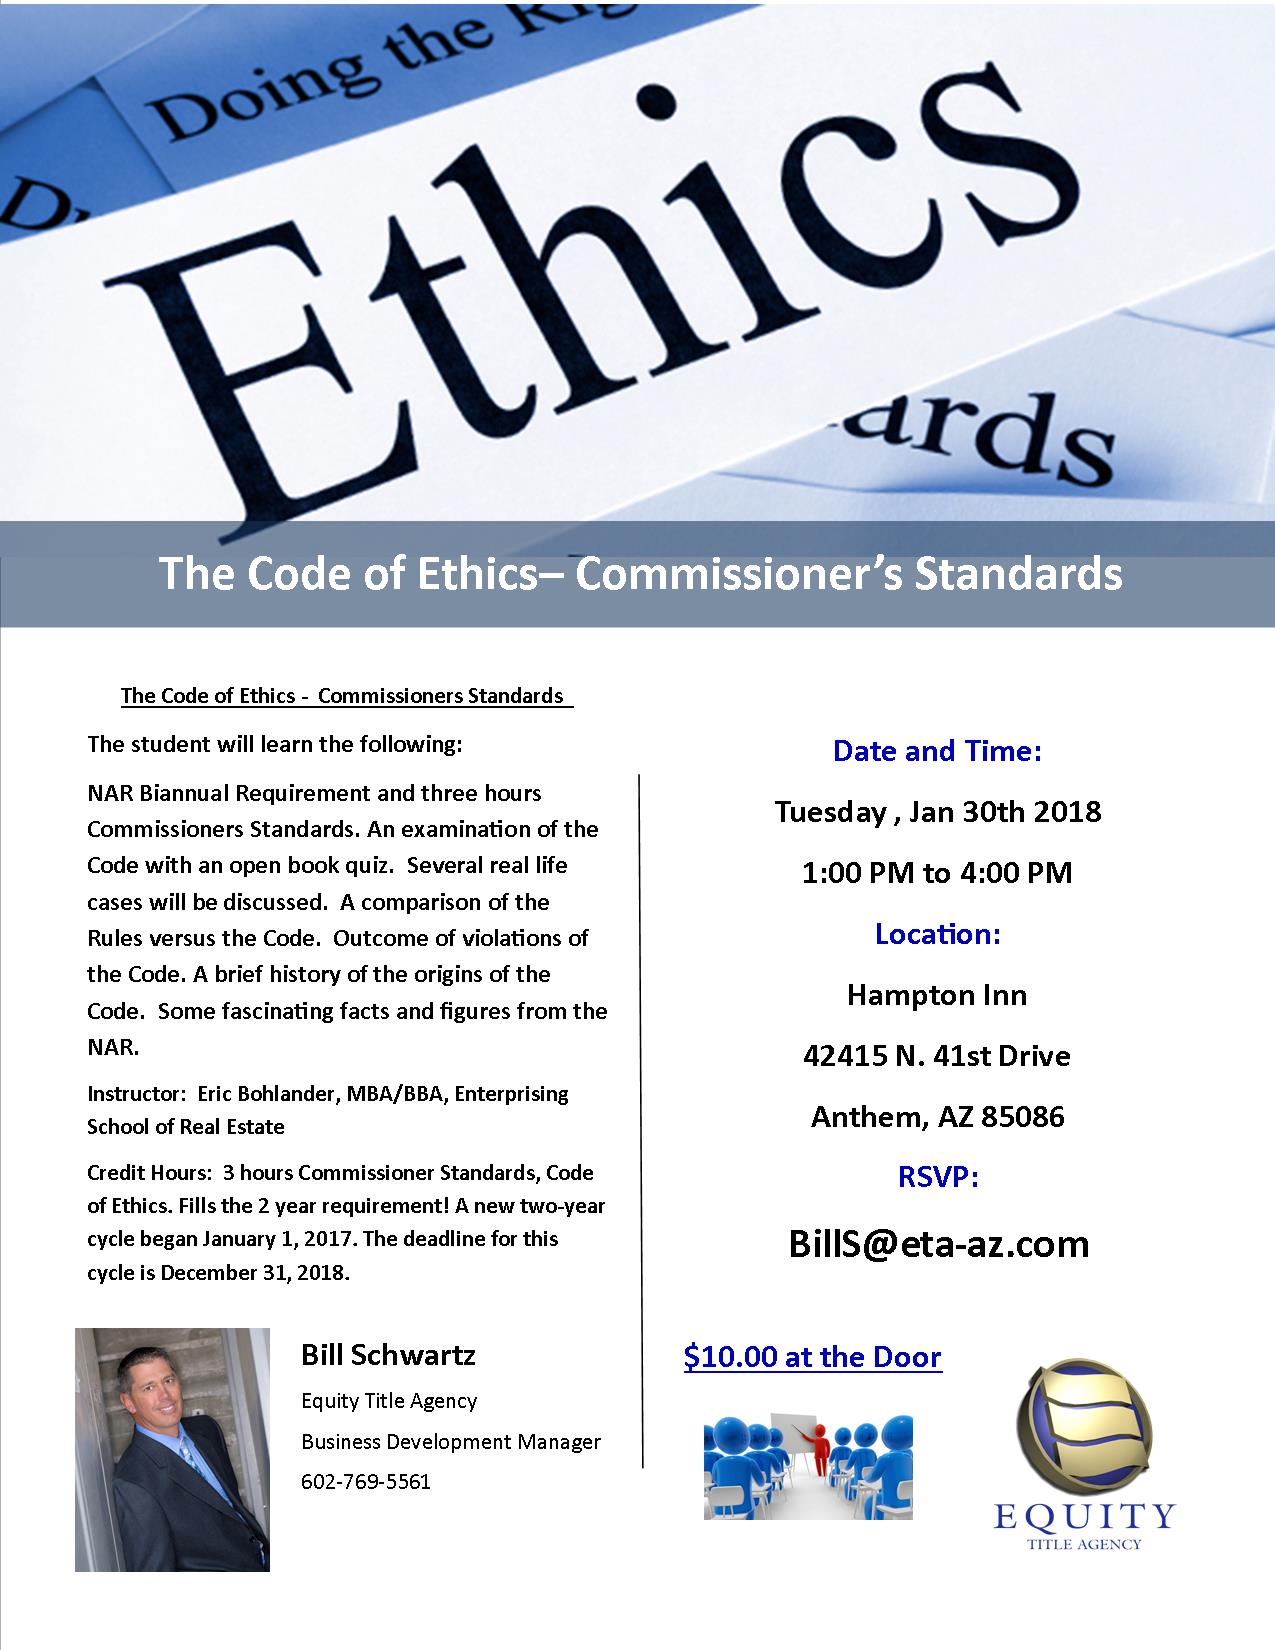 Code of Ethics Commisioners Standards